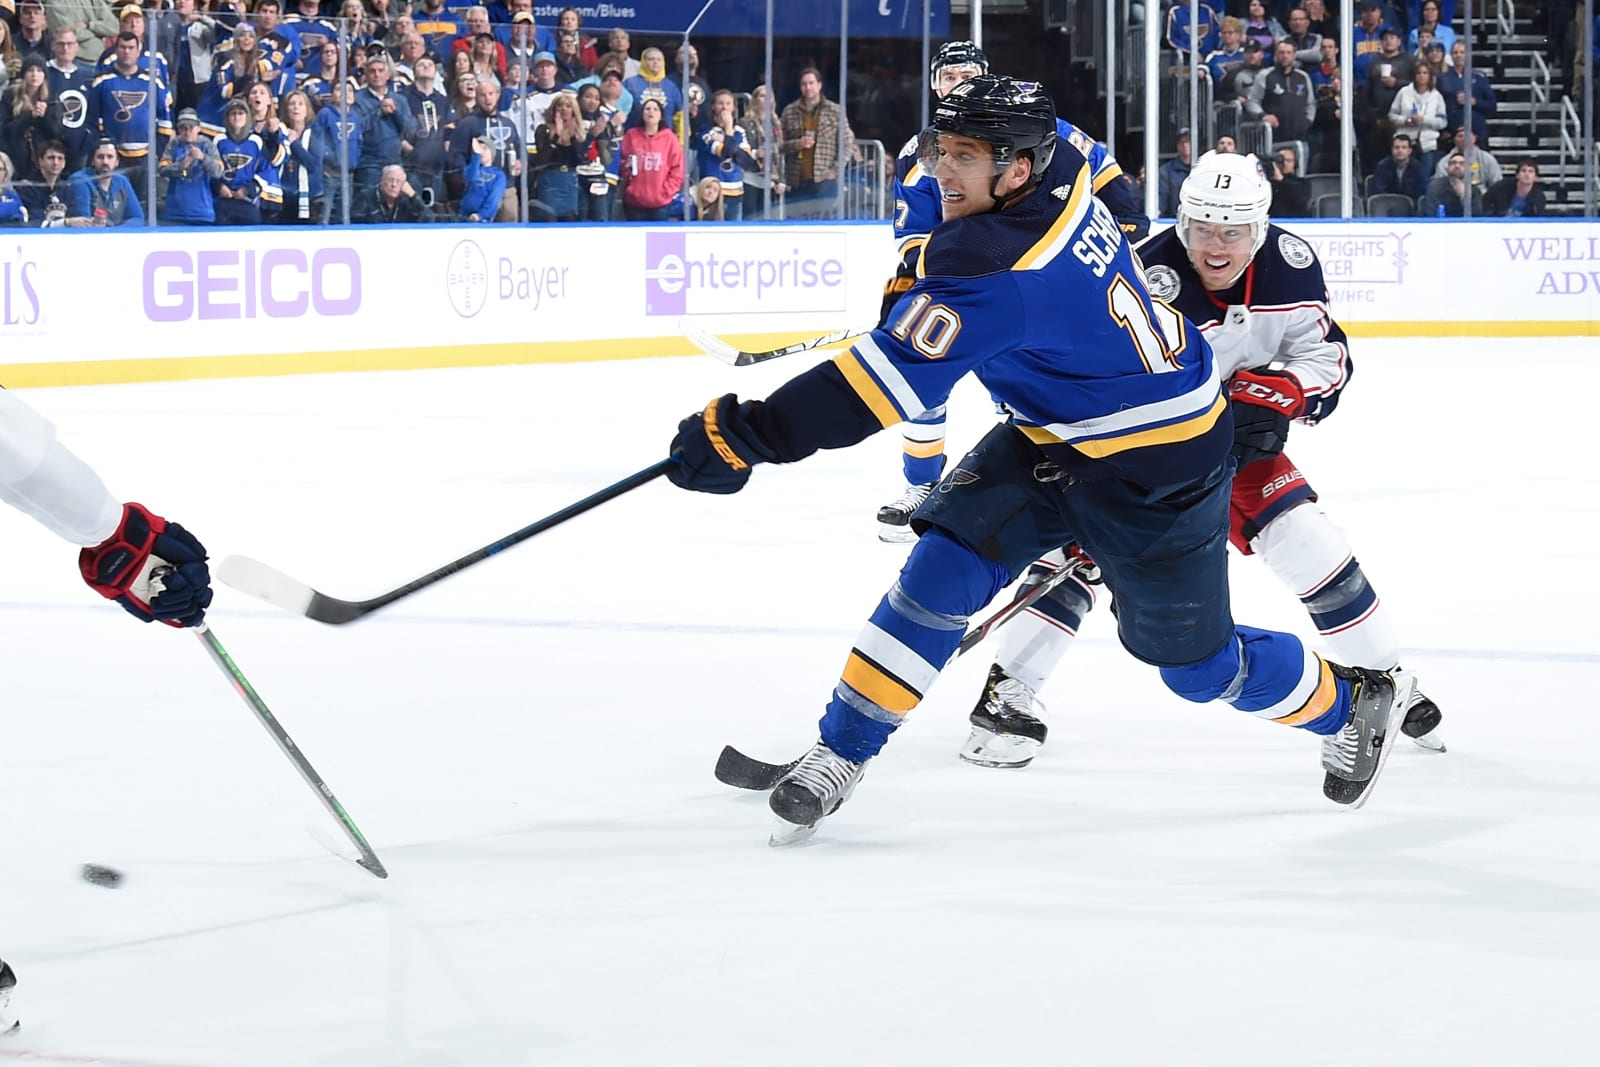 David Perron of the St. Louis Blues skates against the Columbus Blue  News Photo - Getty Images